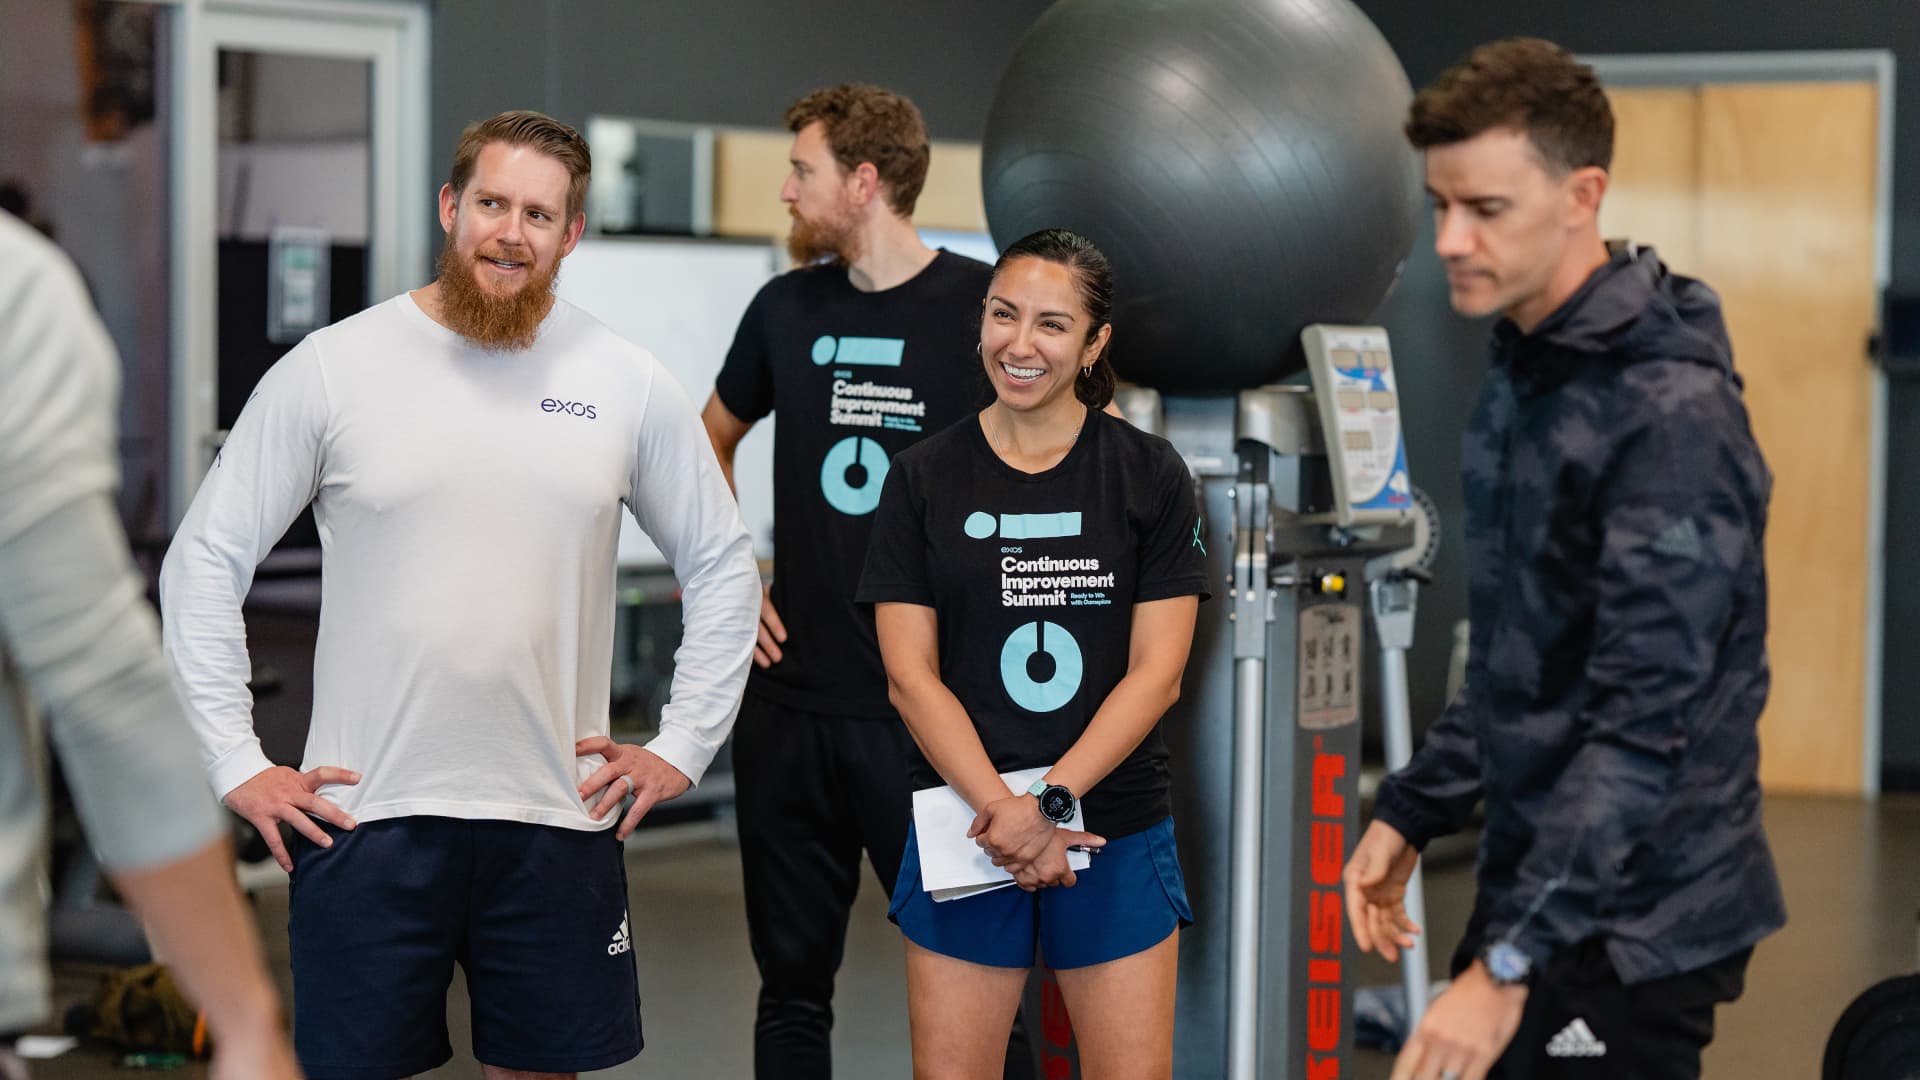 Exos, a coaching company that trains pro athletes and runs corporate wellness programs, will pilot a 4-day workweek in May.